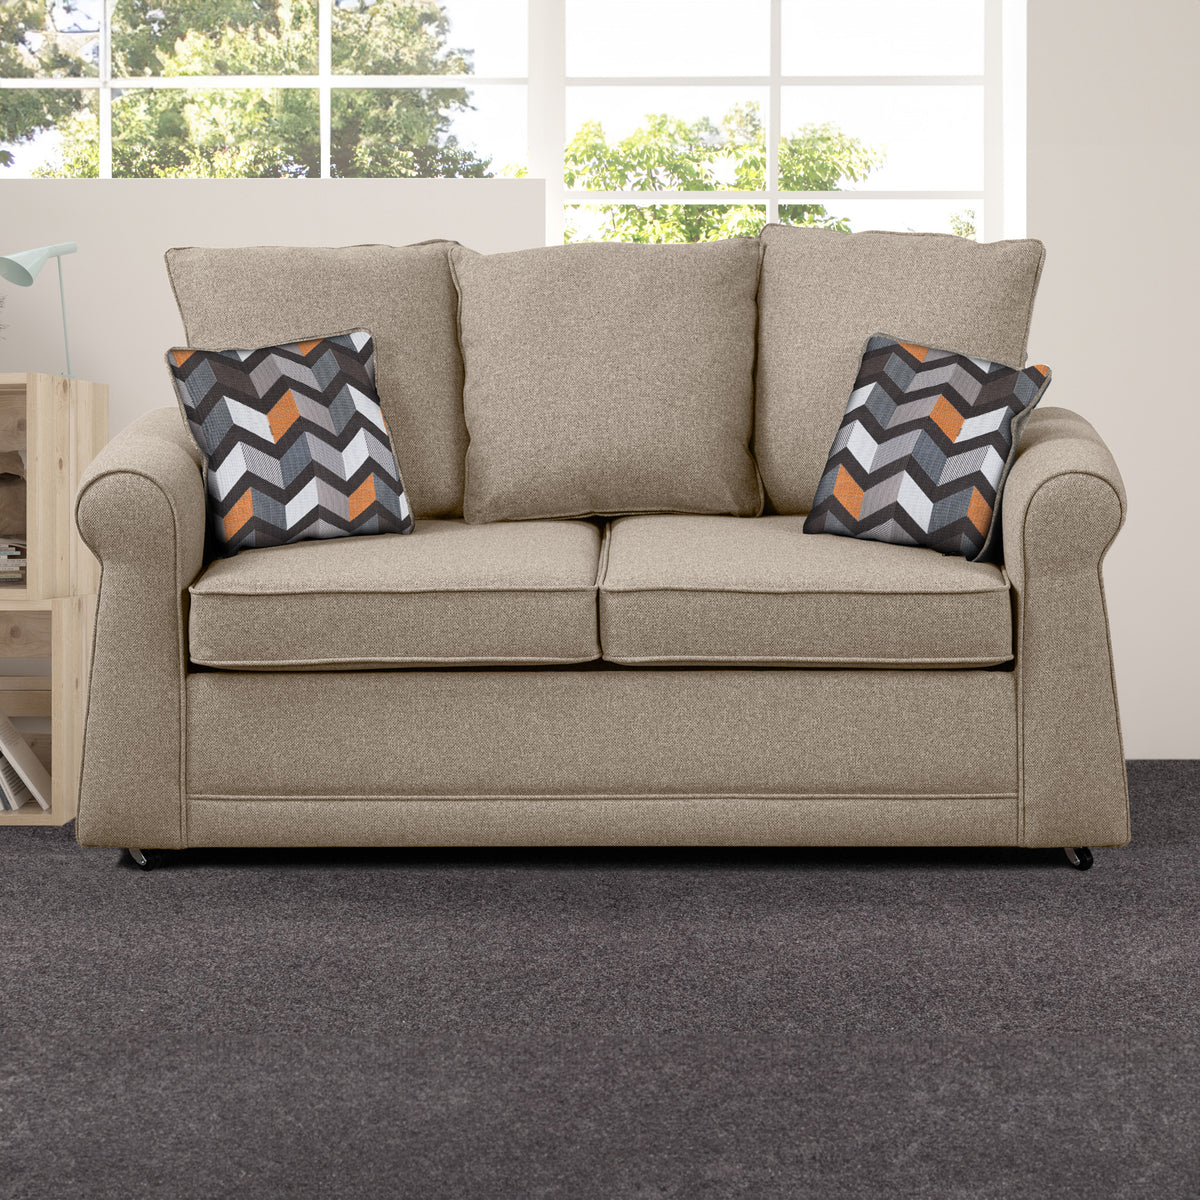 Broughton Oatmeal Faux Linen 2 Seater Sofabed with Charcoal Scatter Cushions from Roseland Furniture